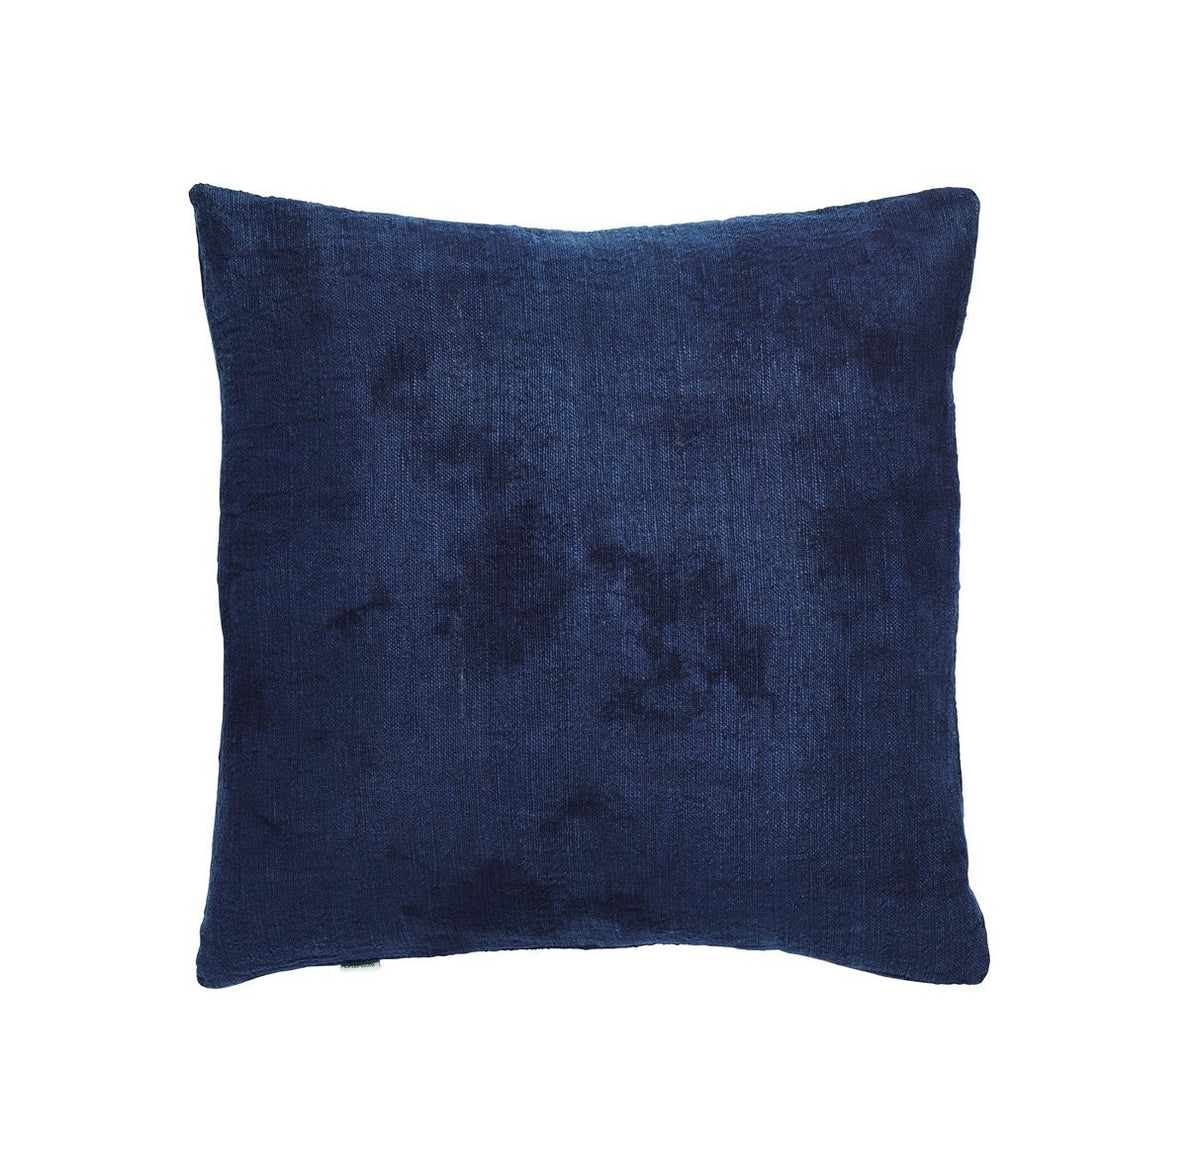 Hand-woven, plant dyed pillowcase (BSH2002)